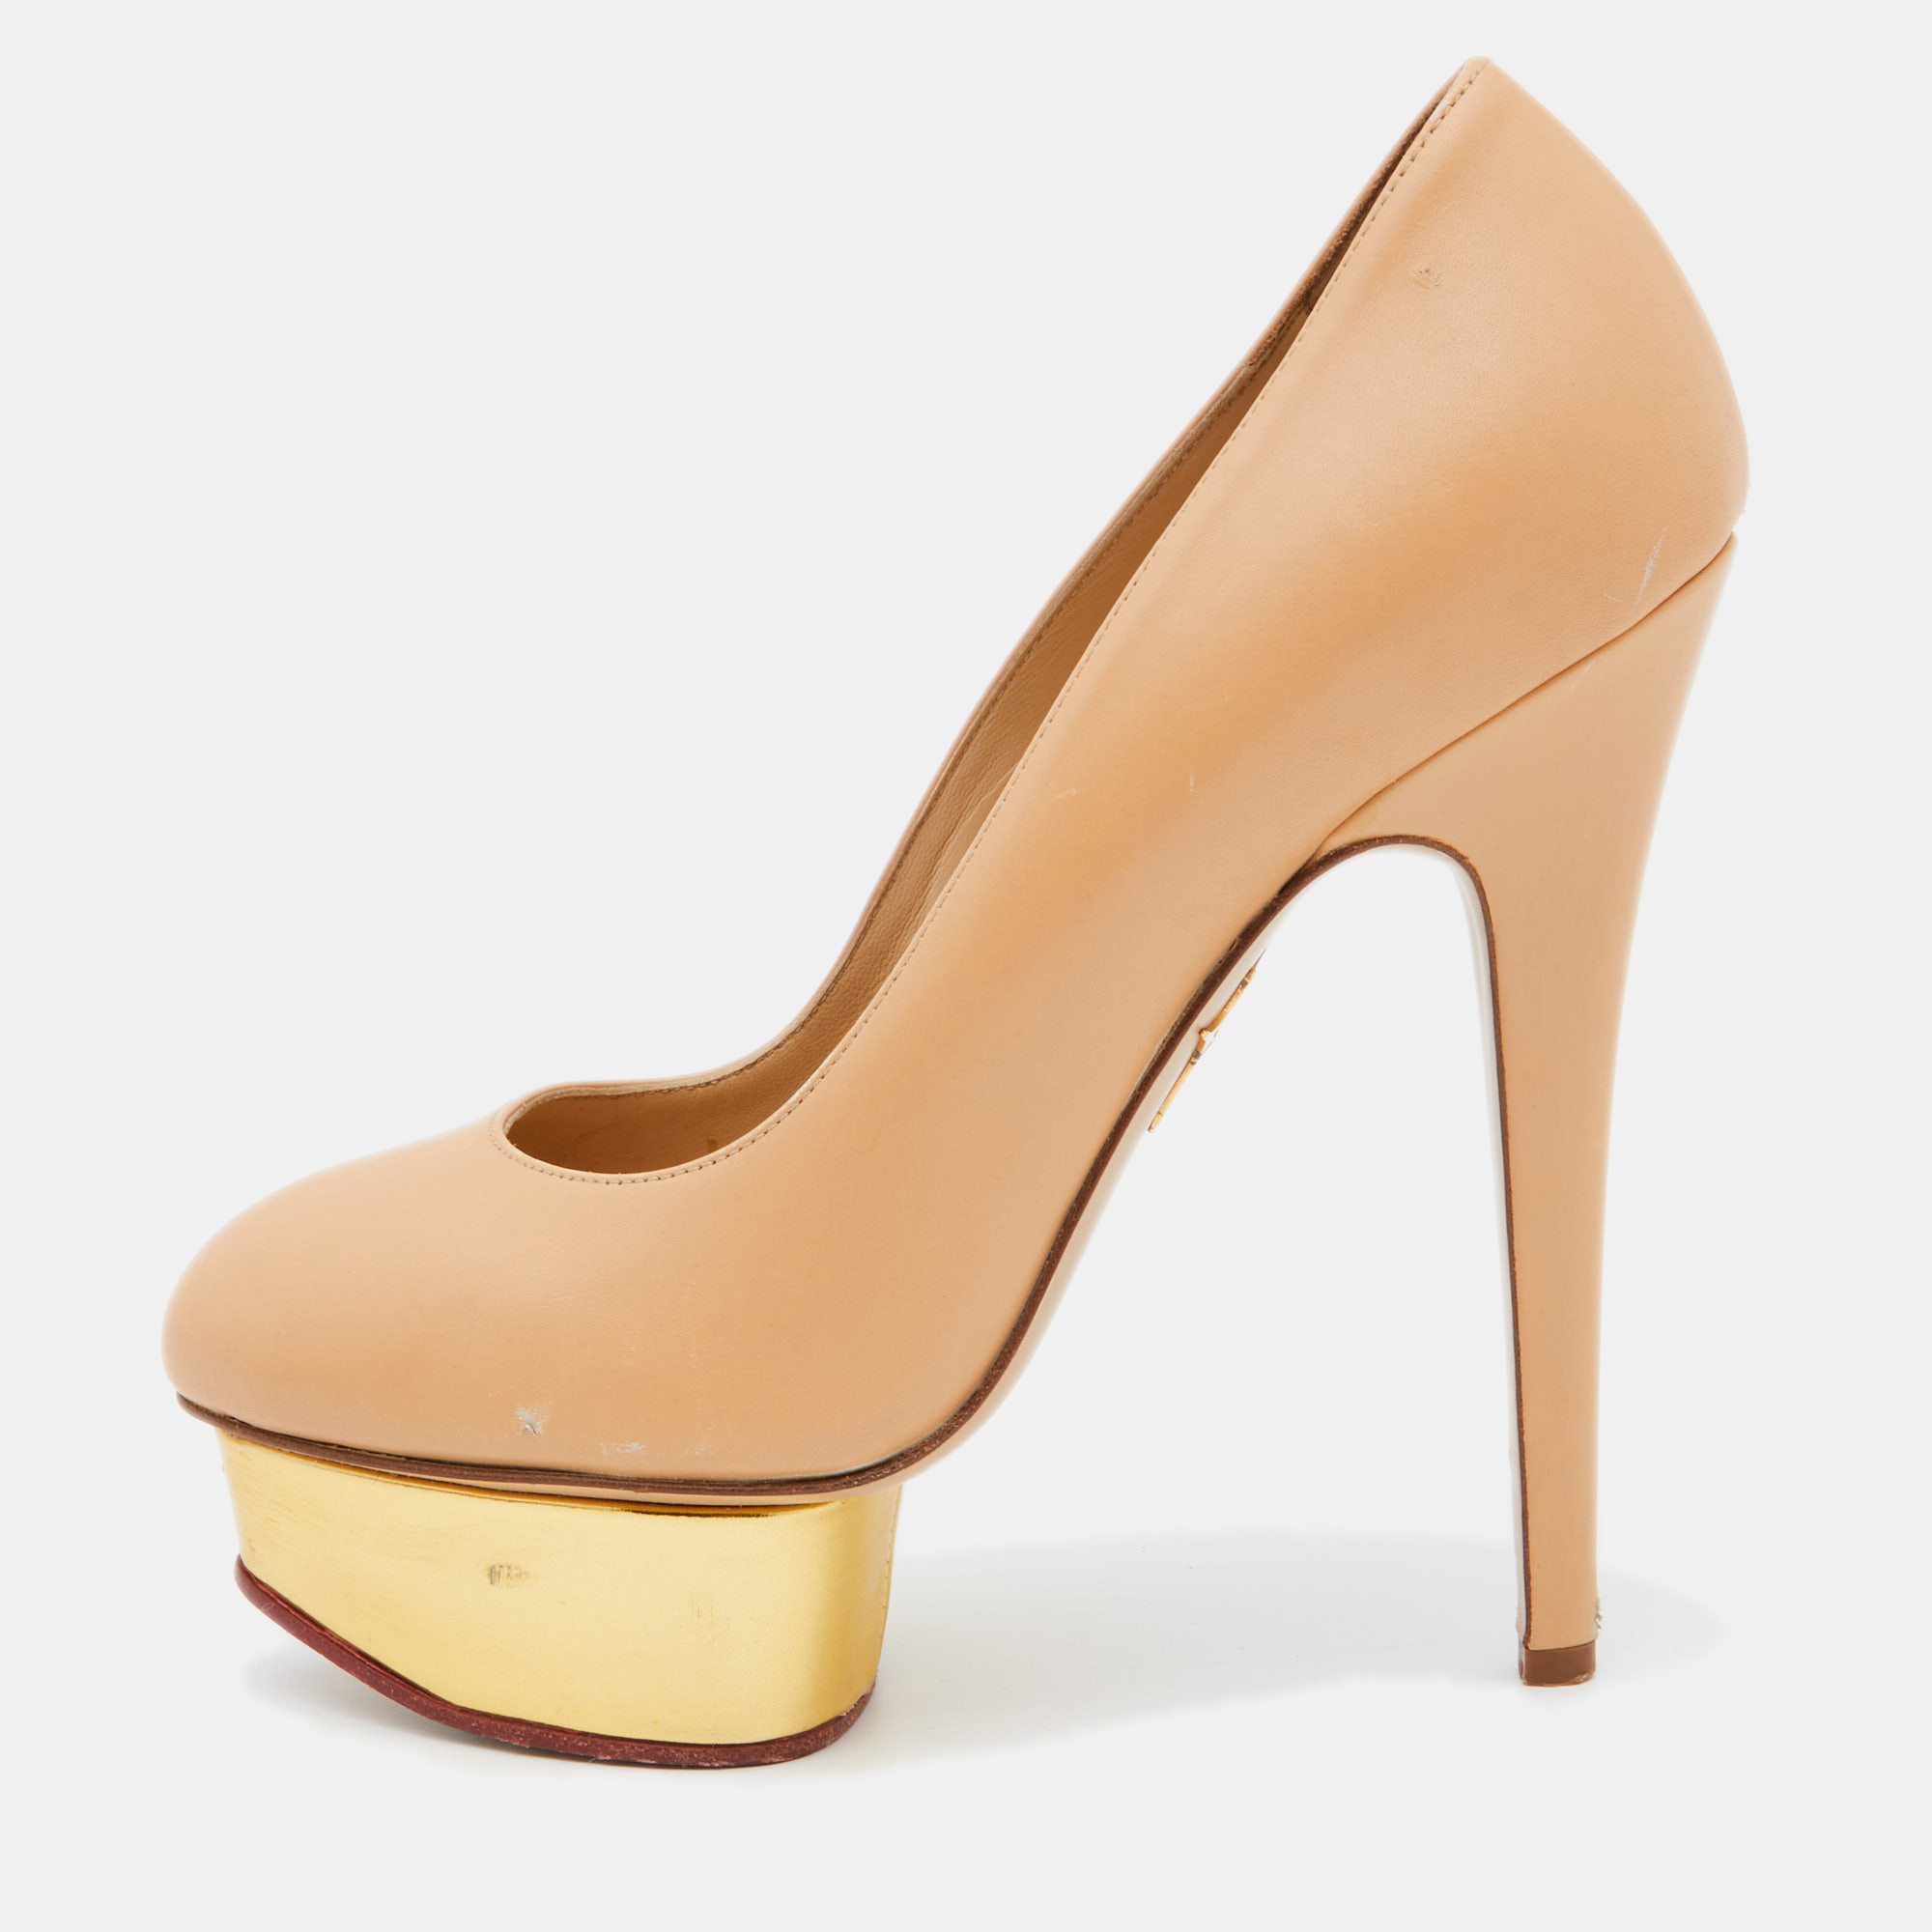 Pre-owned Charlotte Olympia Beige/gold Leather Platform Pumps Size 37